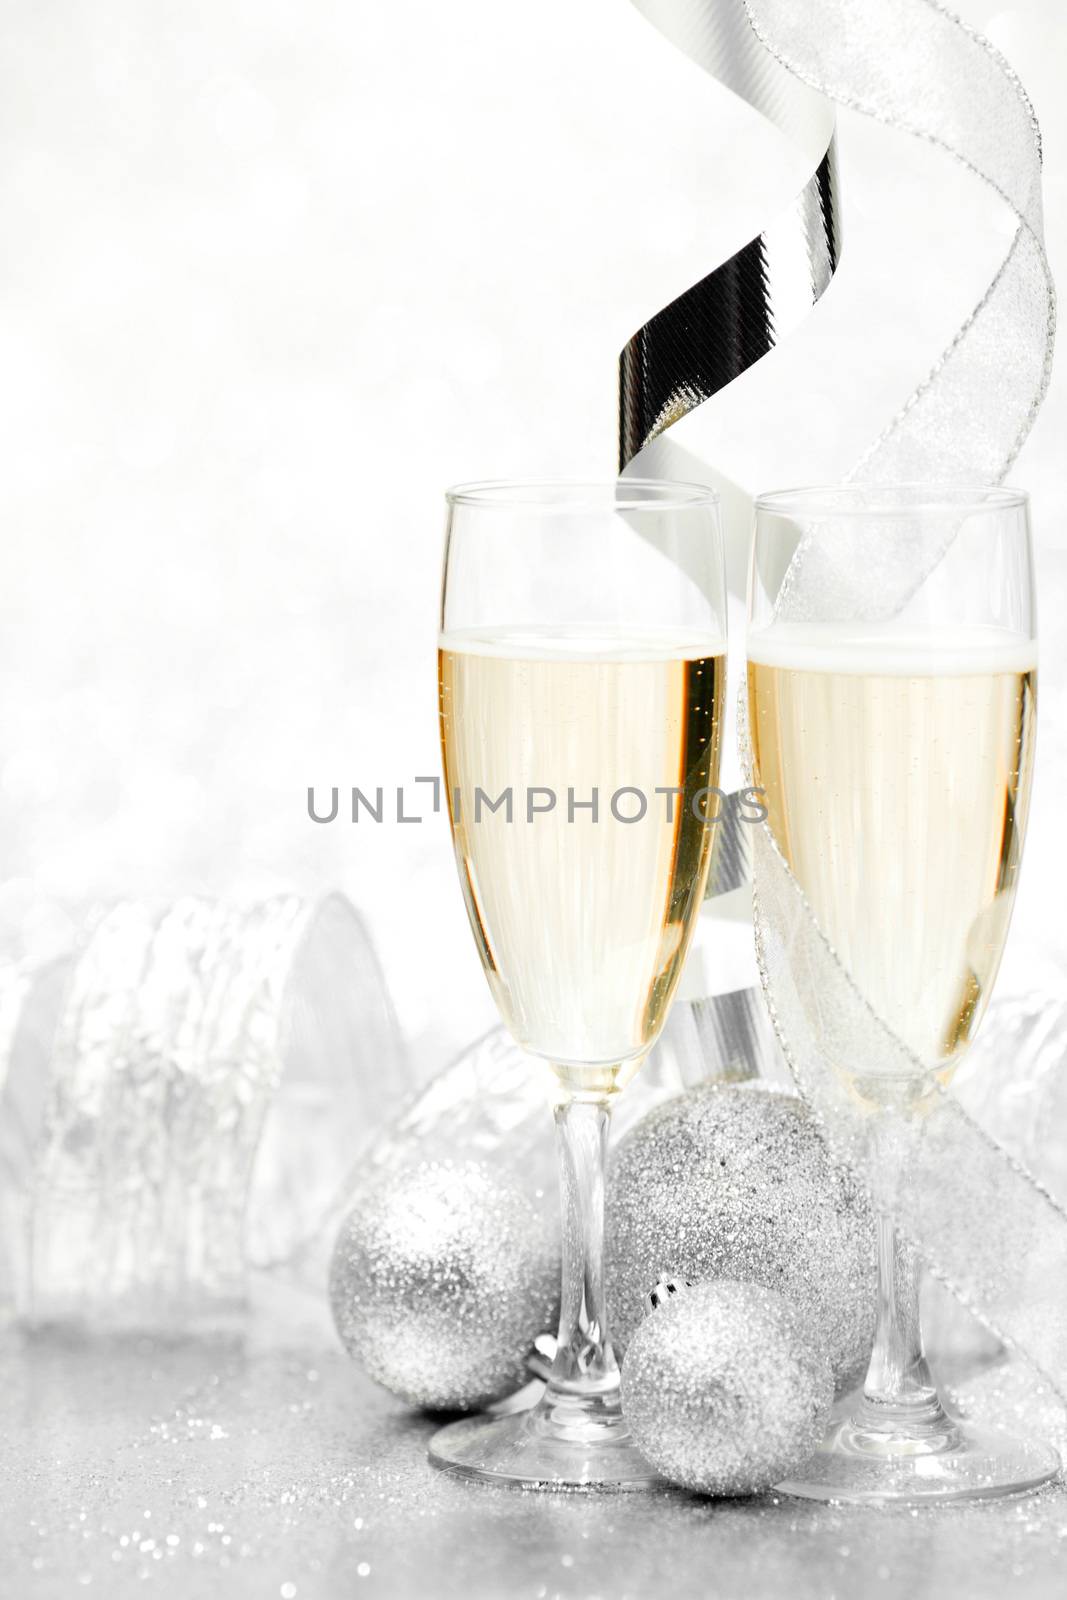 Champagne and decorative balls by Yellowj